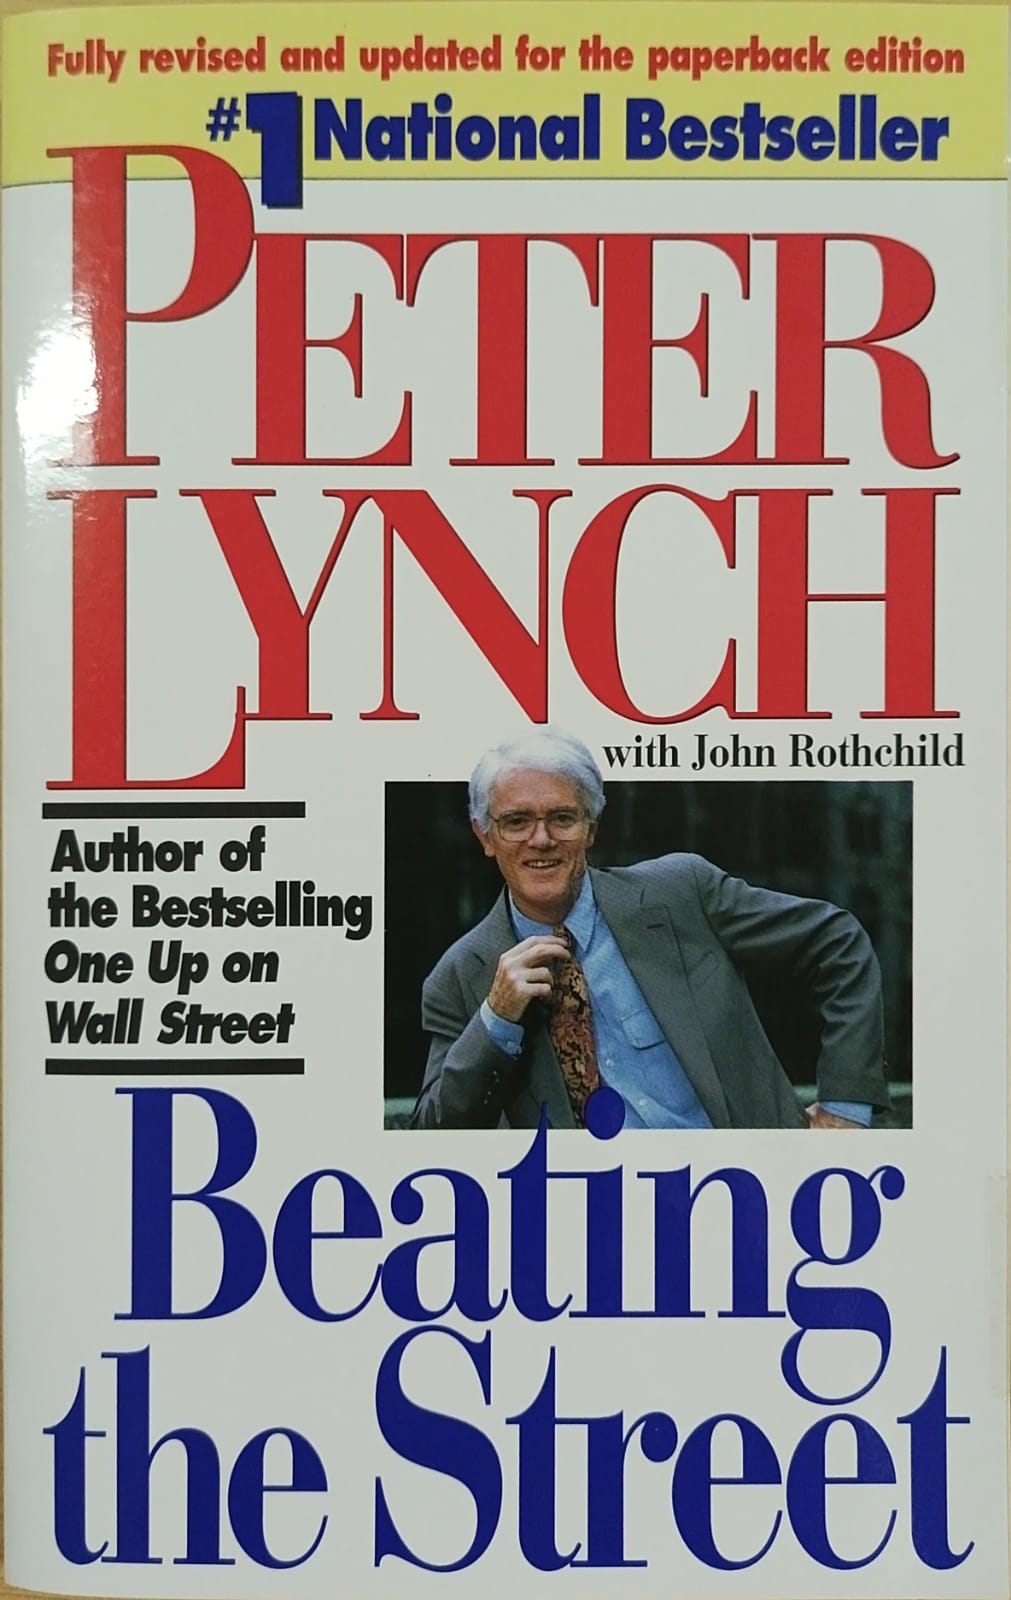 Beating the street: the best-selling author of one up on wall street shows you how to pick winning stocks and develop a strategy for mutual funds